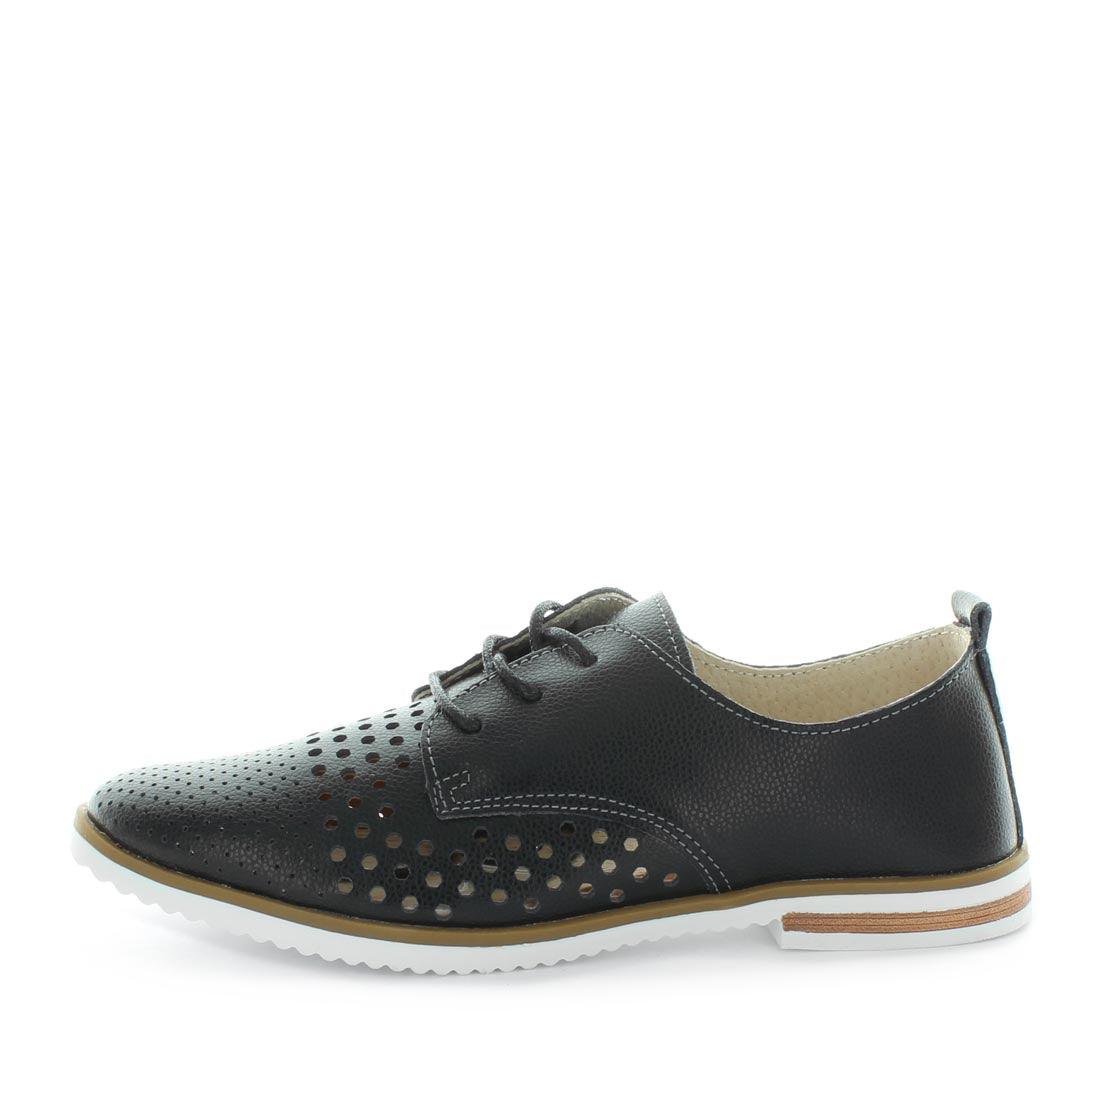 Chela just bee shoes- just bee comfort, just bee online, brogue style leather shoes, women's leather shoes with comfort insole, comfort leather ladies shoes, ladies leather brogue shoes (7552426901737)